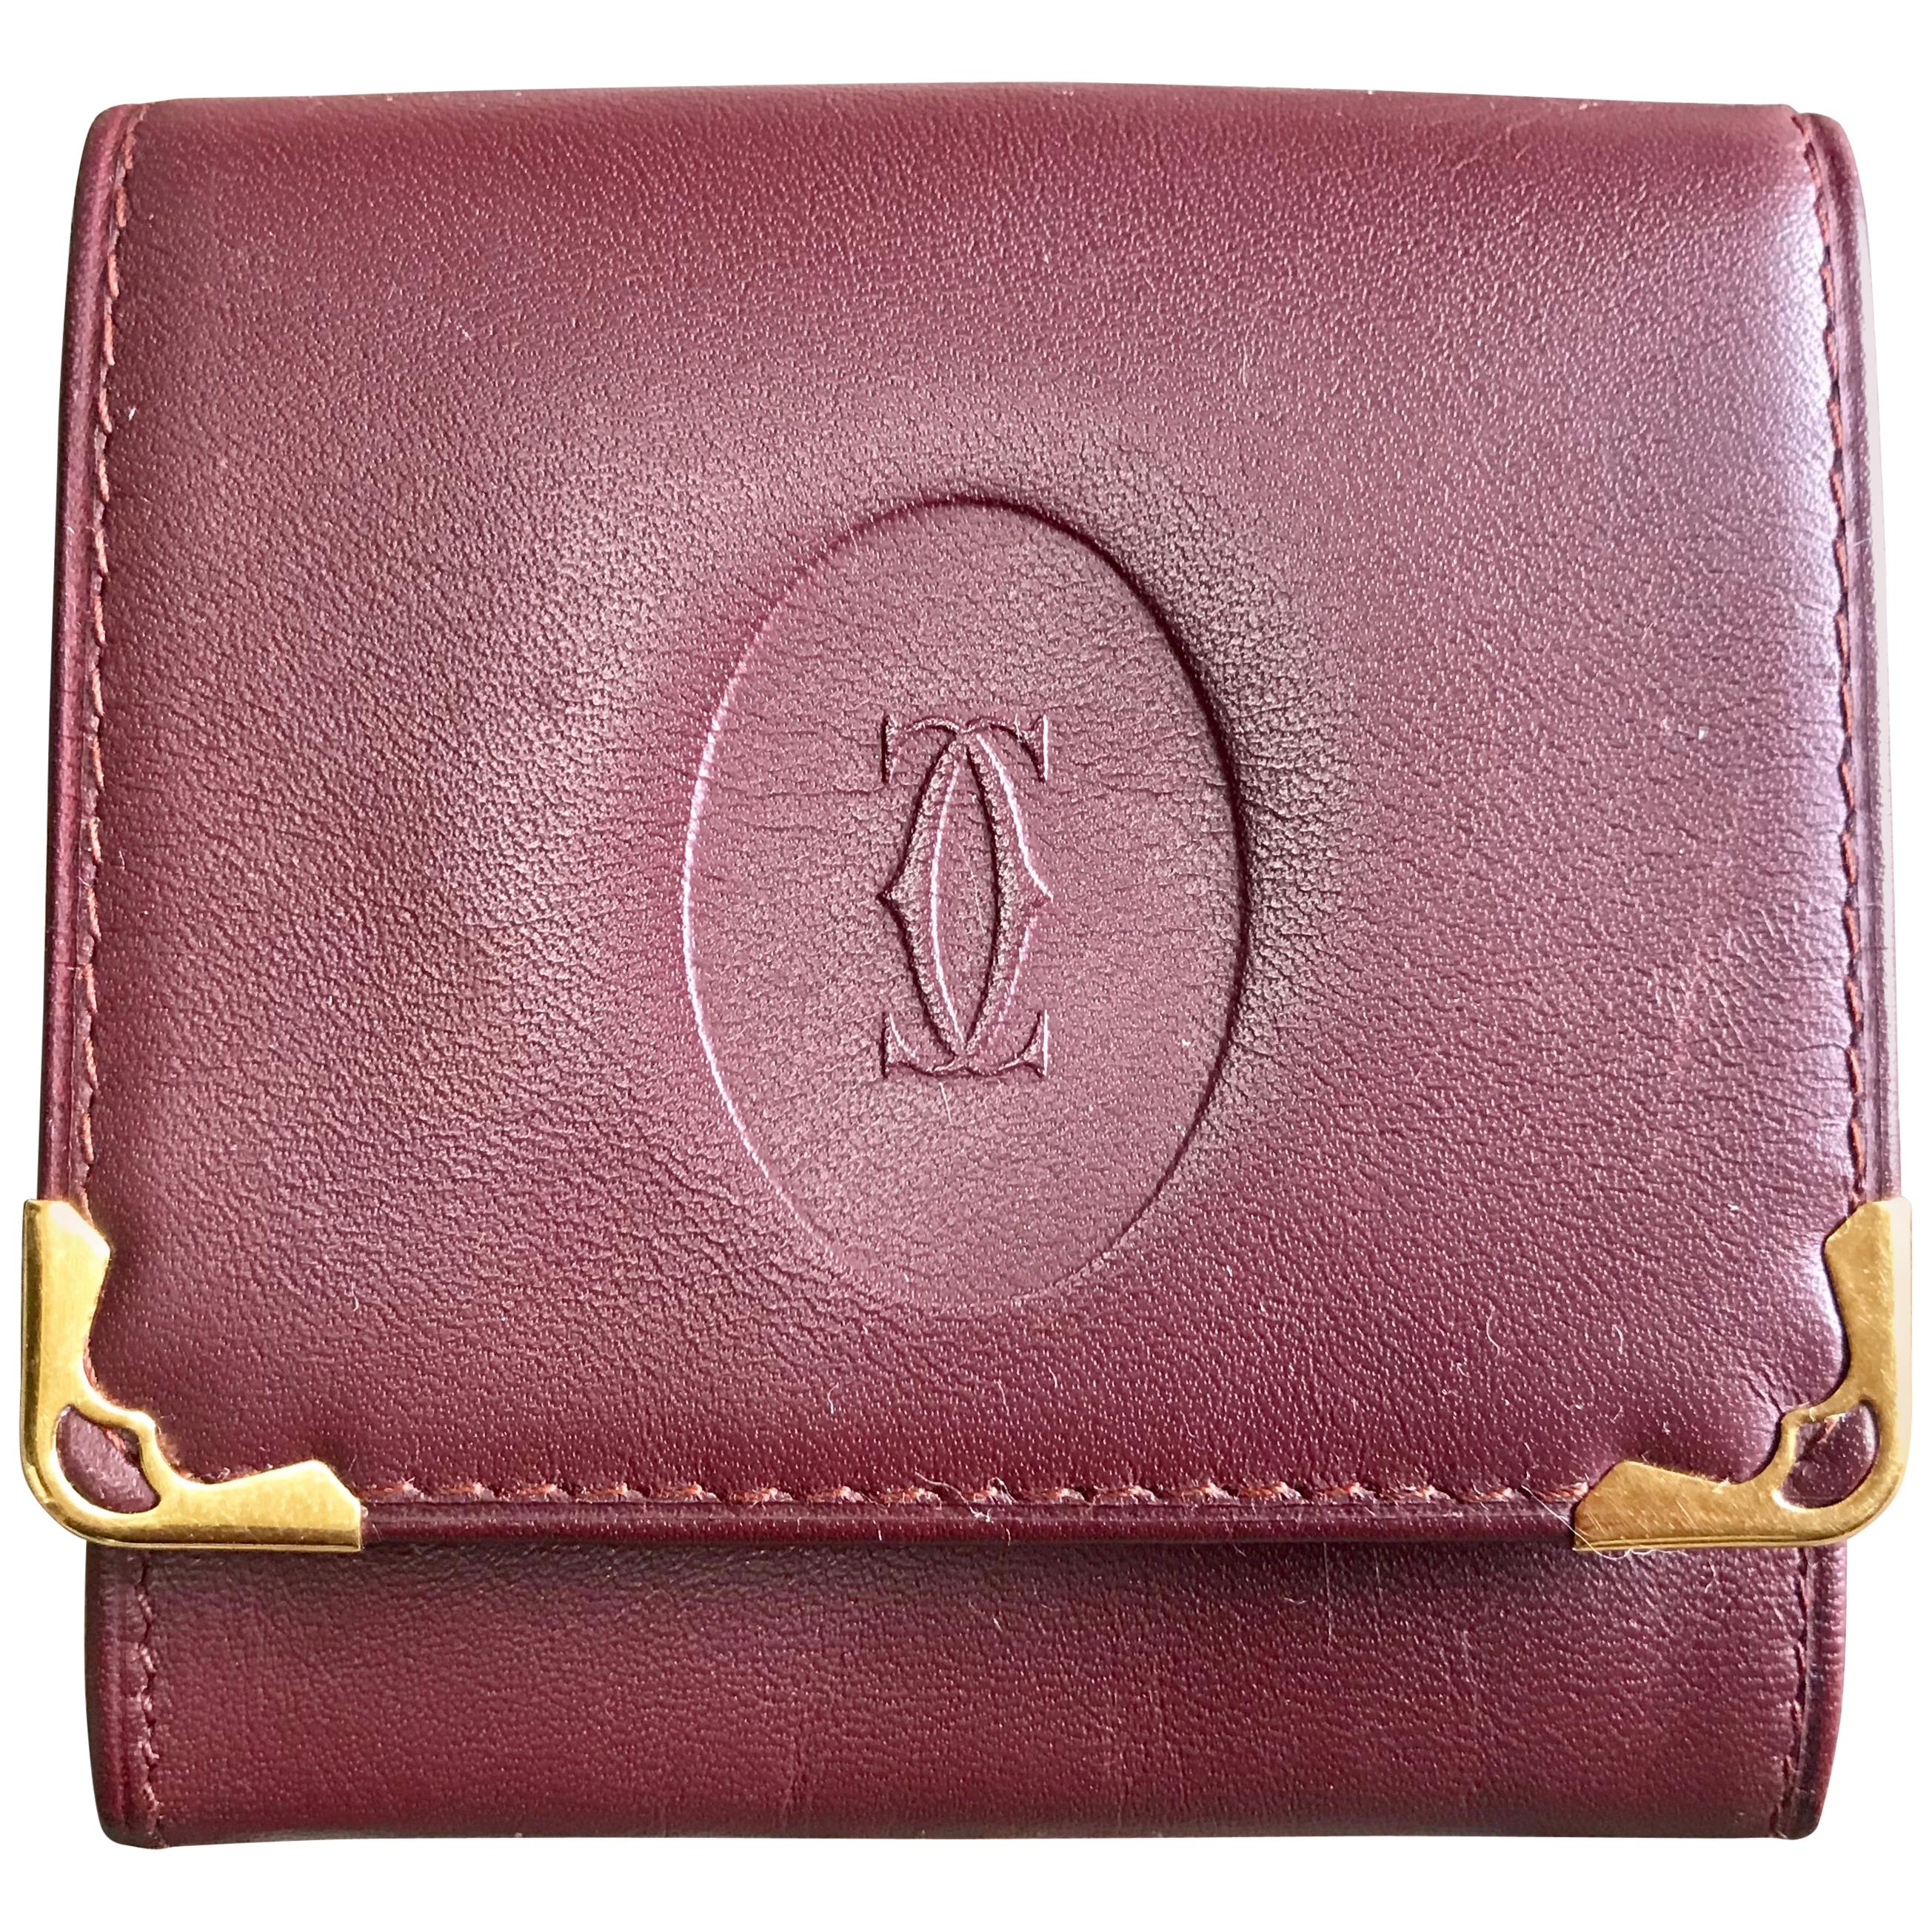 Vintage Cartier wine leather coin case with gold tone frames. must de Cartier. For Sale